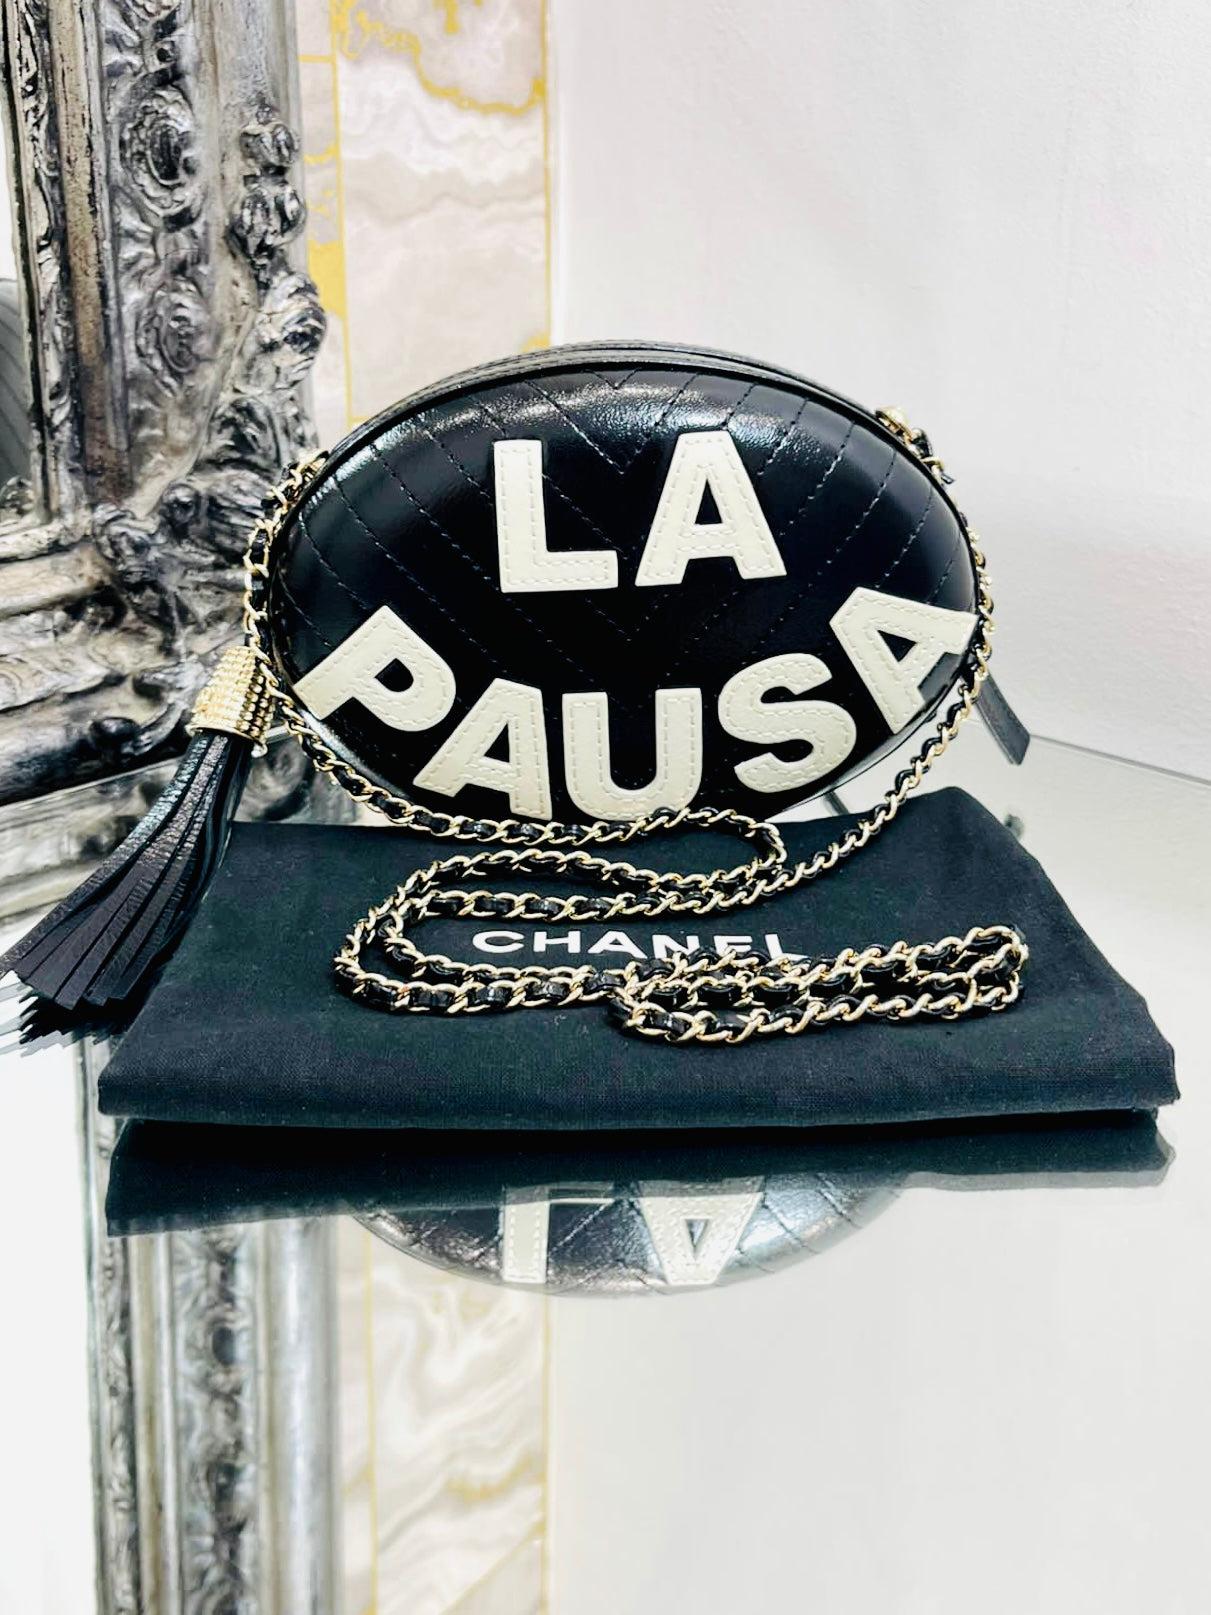 Chanel La Pausa Villa Leather Bag

Oval hard case bag in black chevron Lambskin leather with contrasting white, stitched wording 'LA PAUSA'. Gold leather and chain shoulder/crossbody strap. Gold 'CC' capped logo leather tassel. Rare find in black